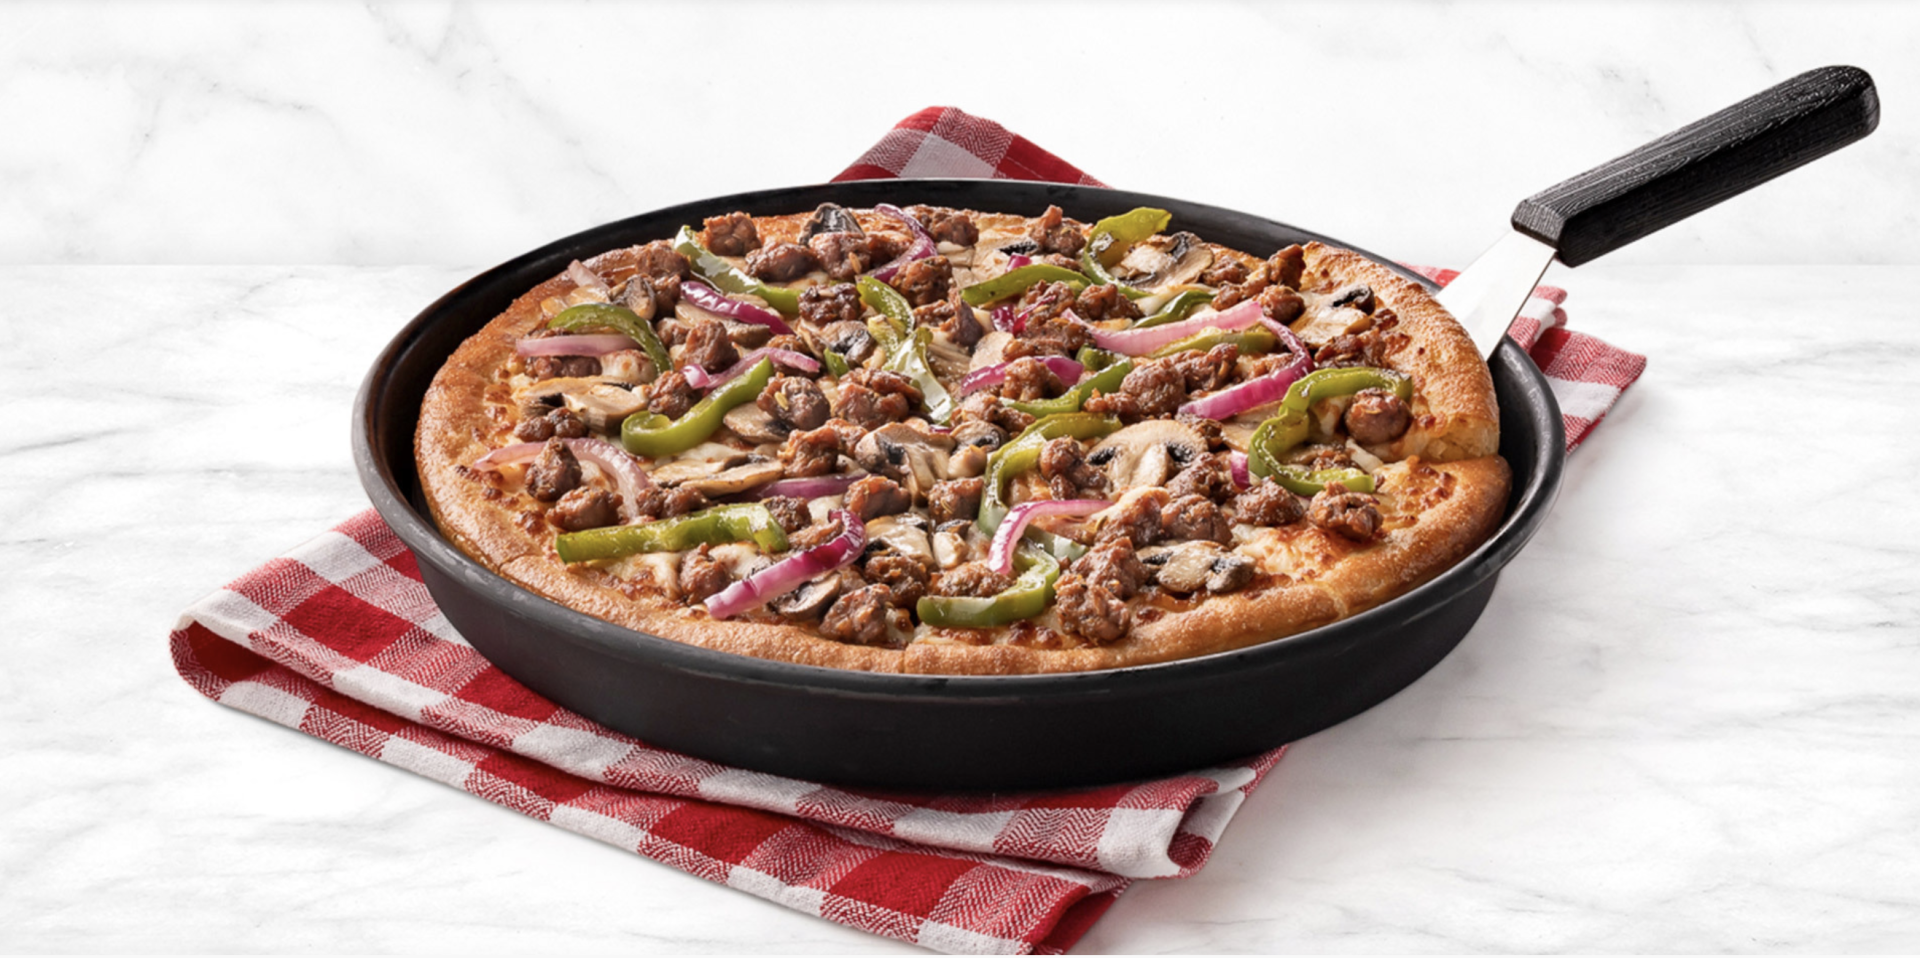 beyond meat pizza